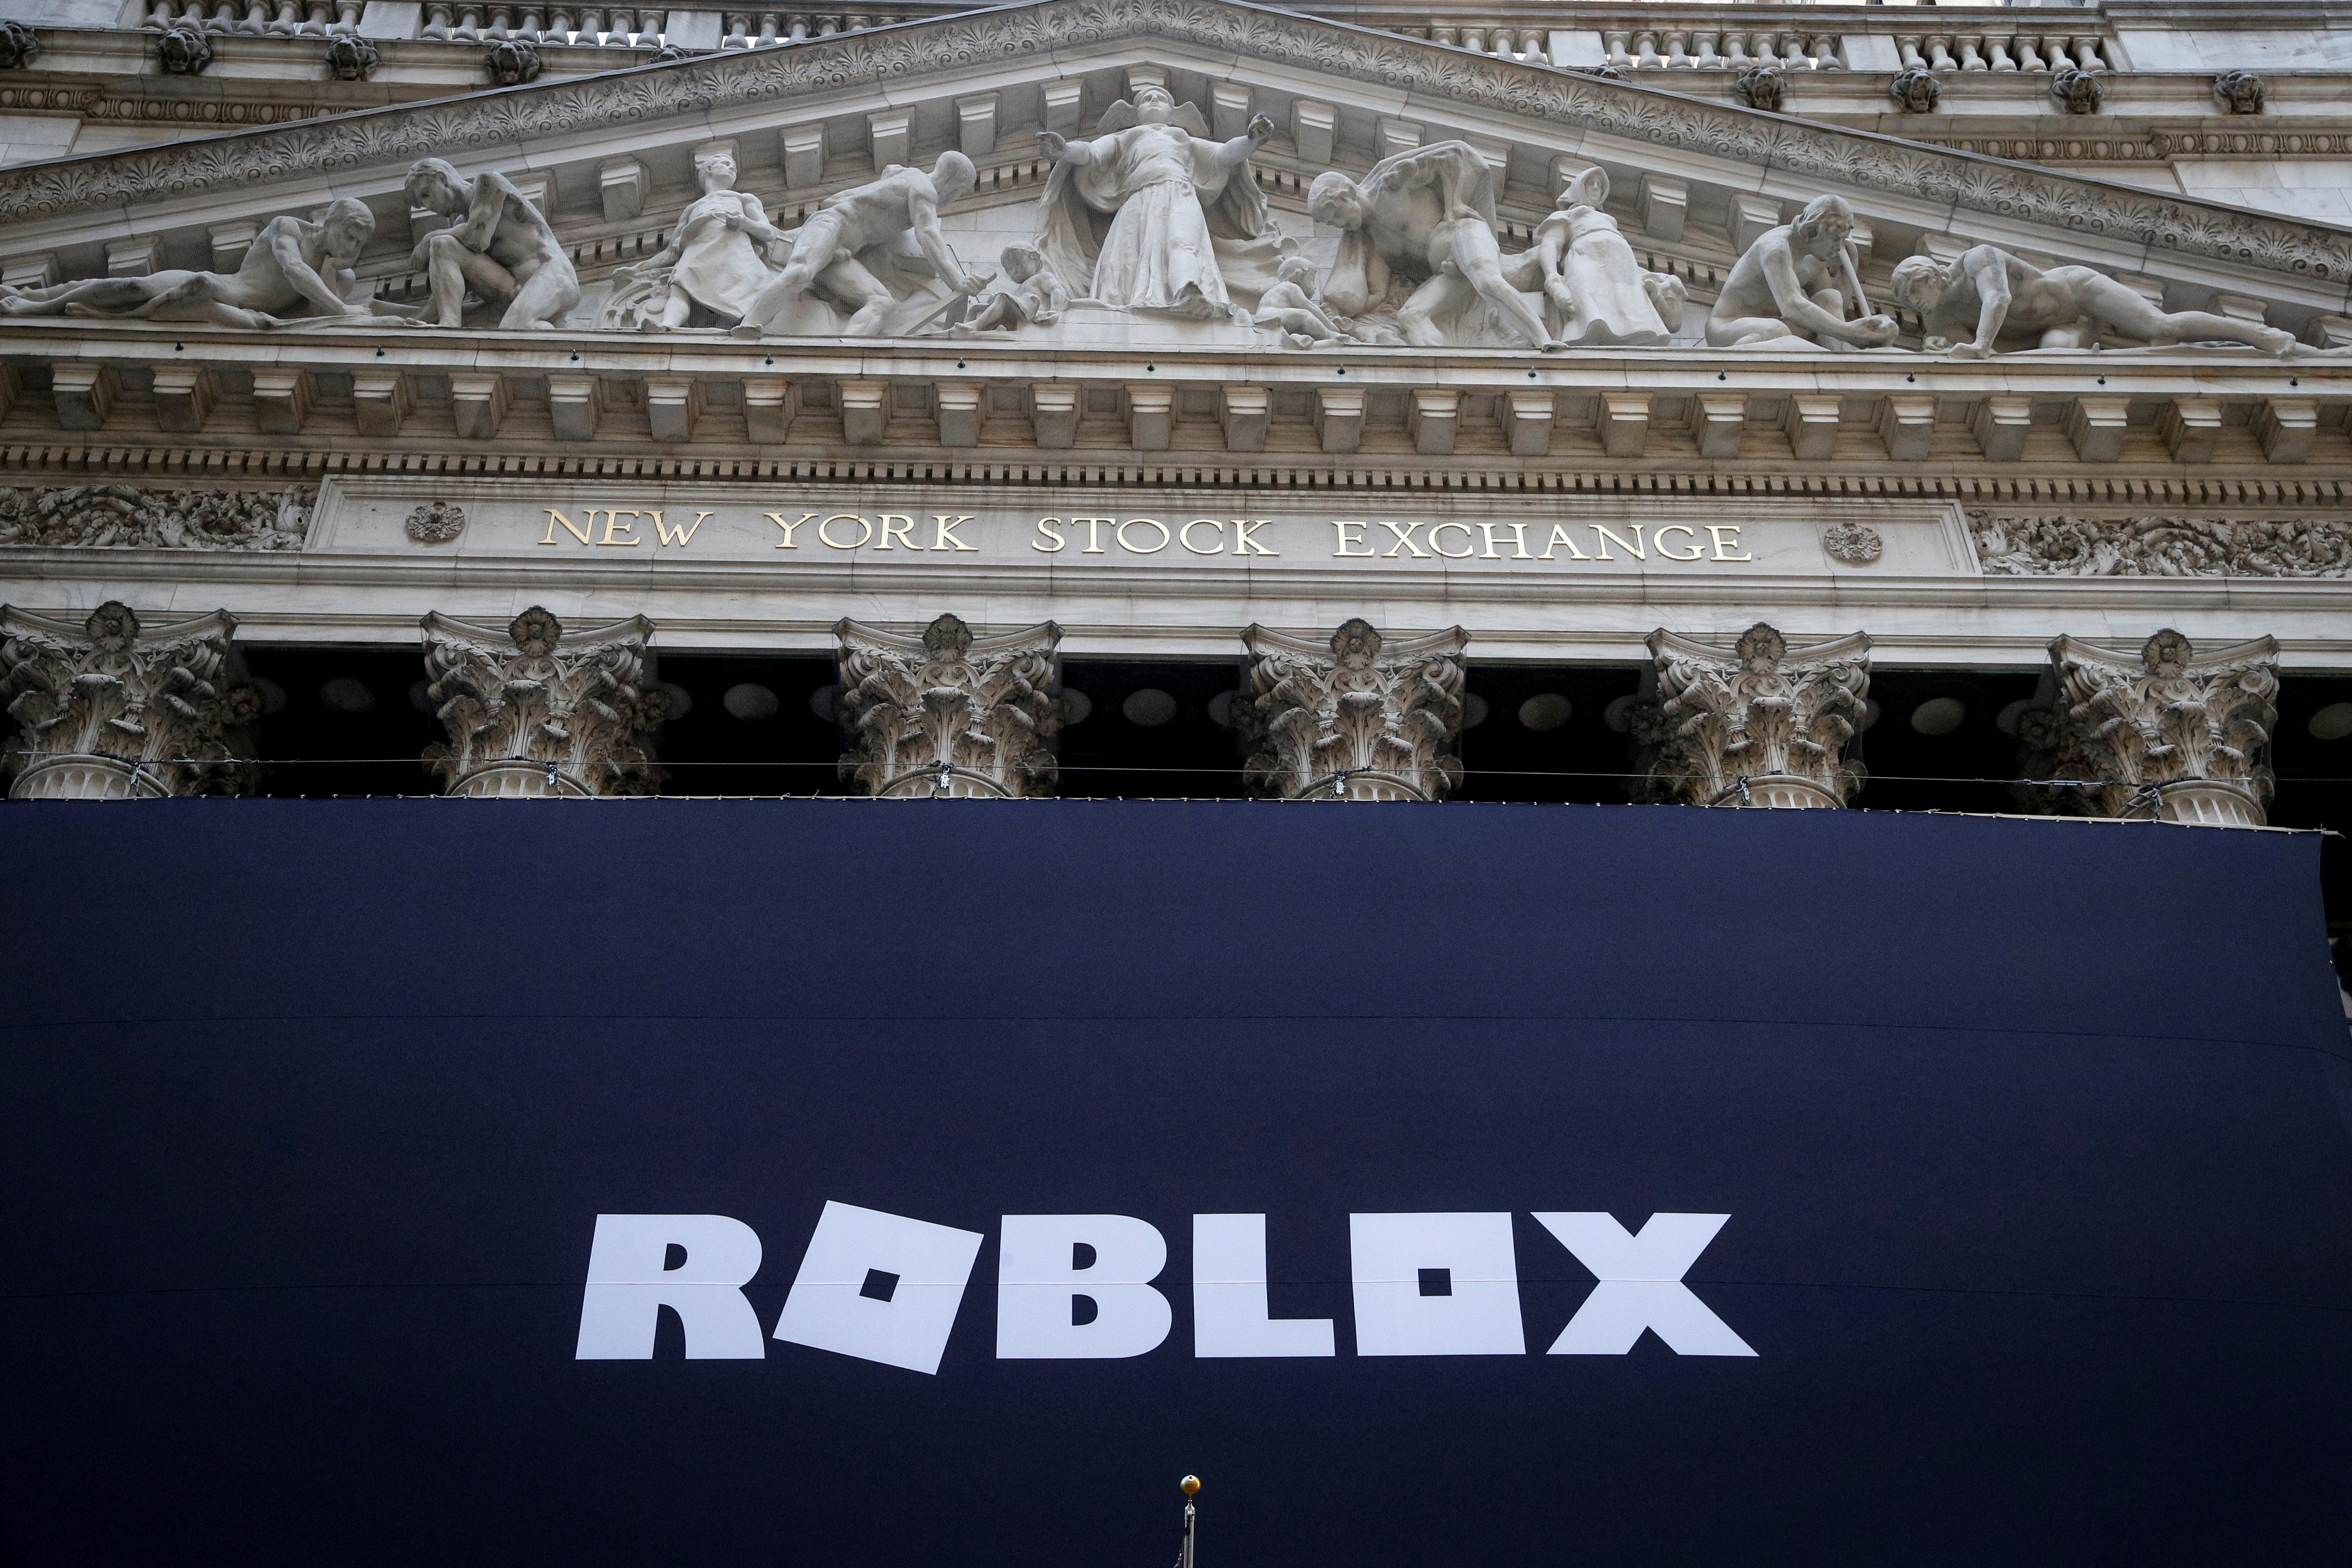 The Roblox logo is displayed on a banner, to celebrate the company's IPO, on the front facade of the New York Stock Exchange (NYSE) in New York, U.S., March 10, 2021. REUTERS/Brendan McDermid/File Photo